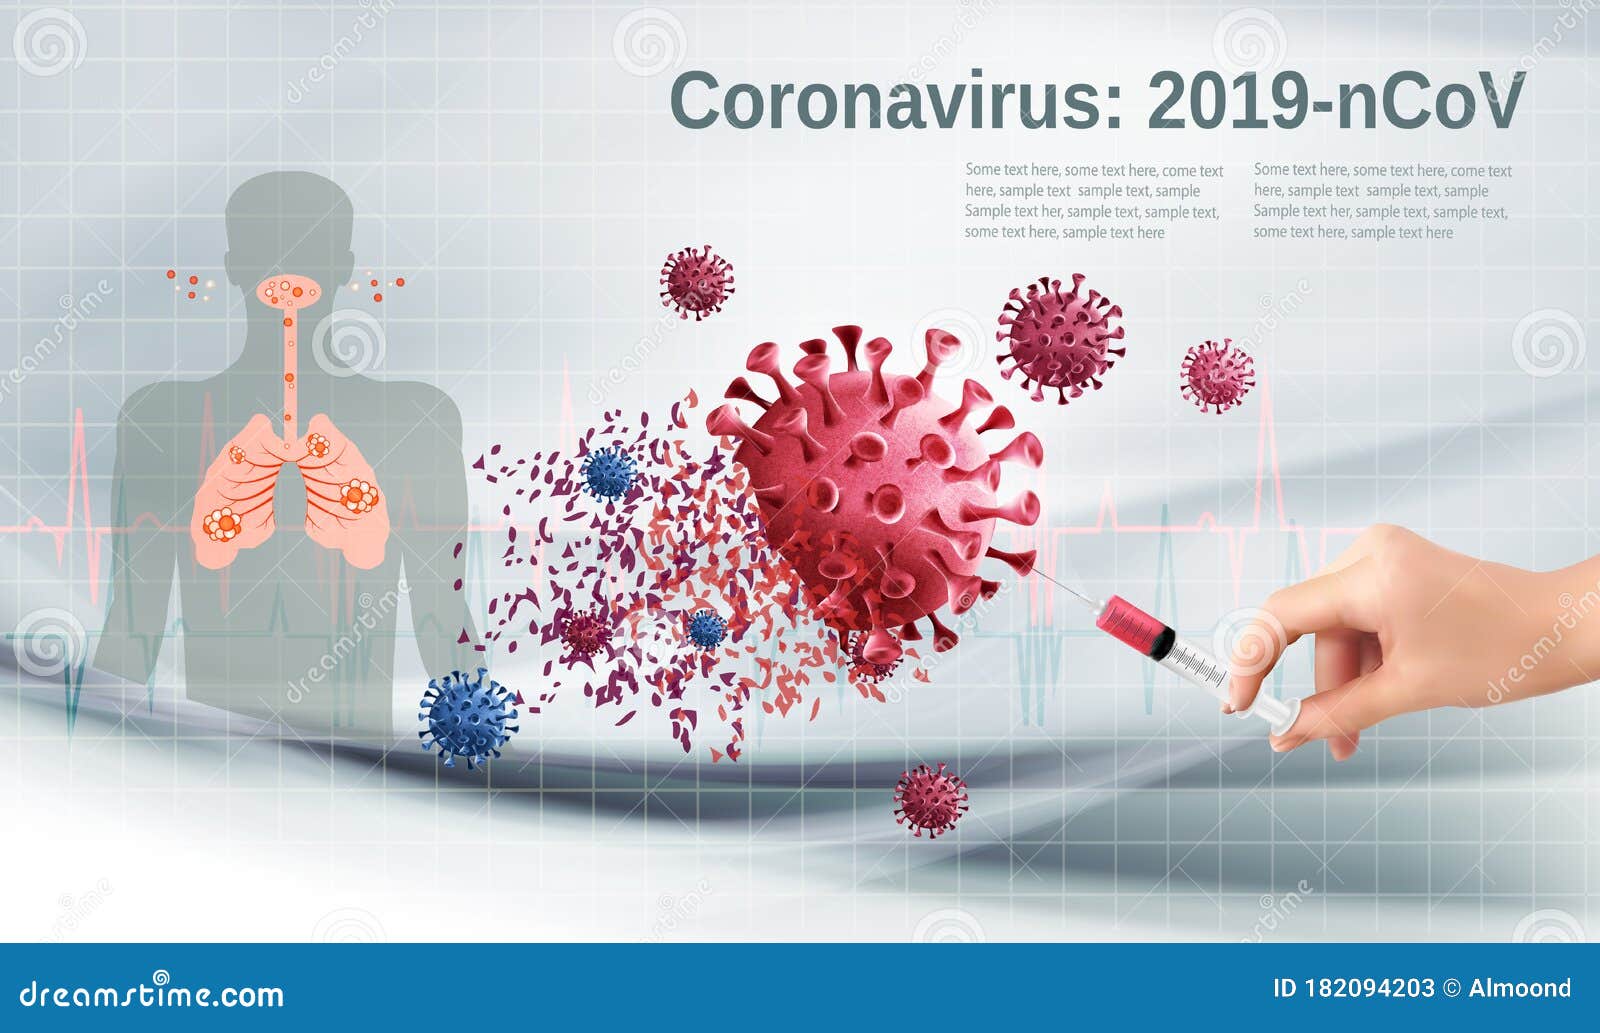 stop coranavirus concept. hand holding syringe with vaccine destroying virus covid